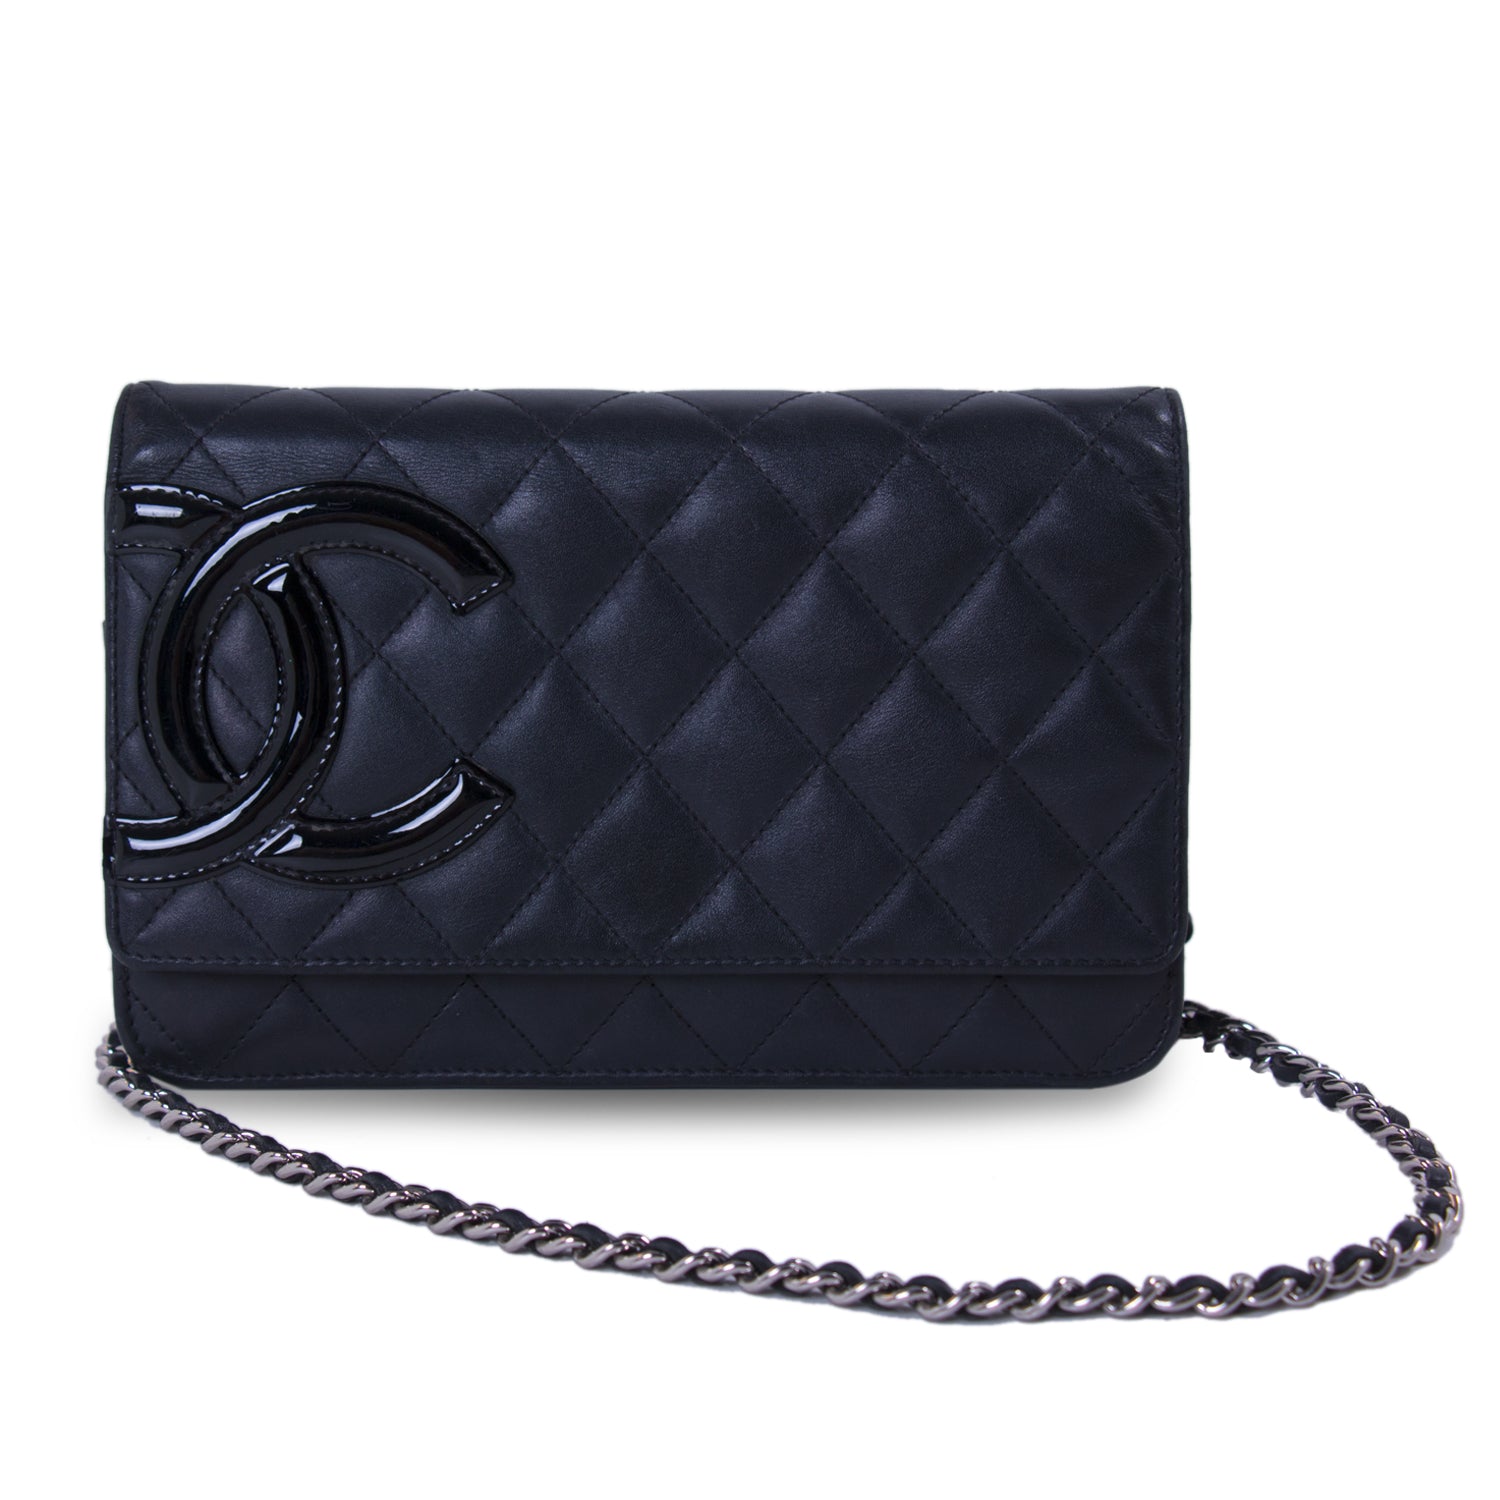 Shop authentic Chanel Cambon Black Wallet on Chain at revogue for just USD  1,